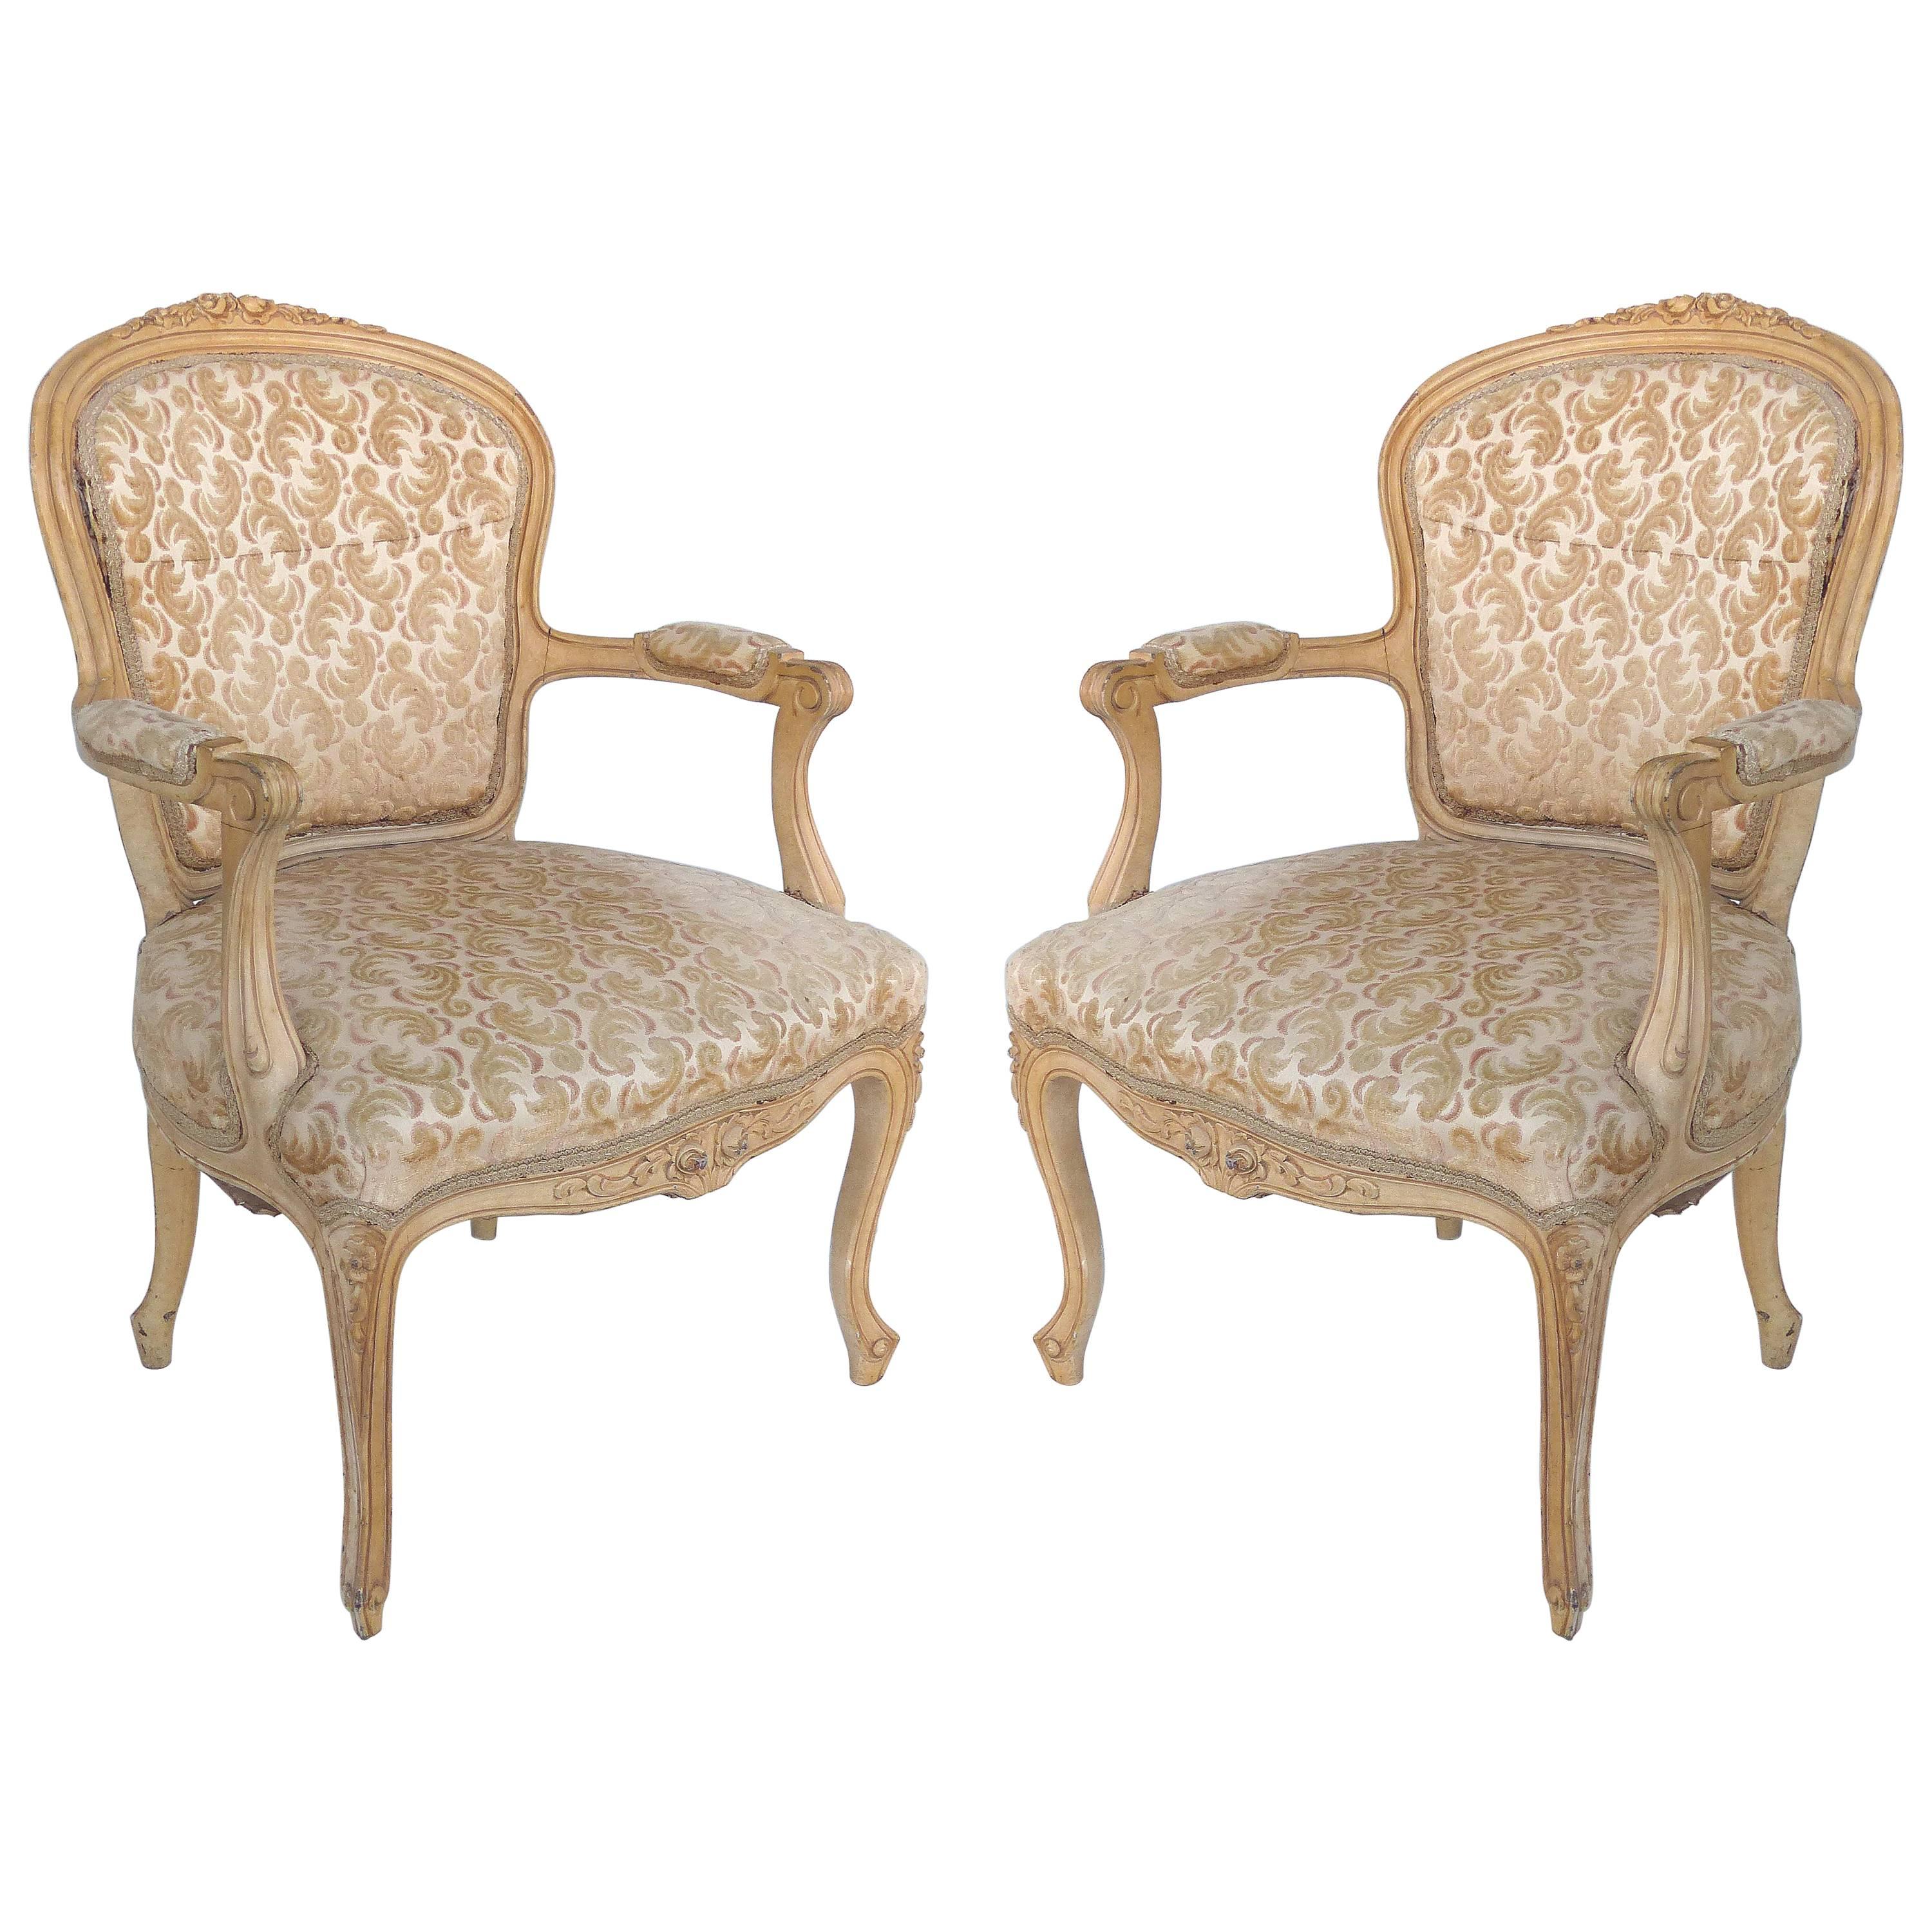 Louis XV Style Provincial Fauteuil Armchairs with Velvet Upholstery, Pair